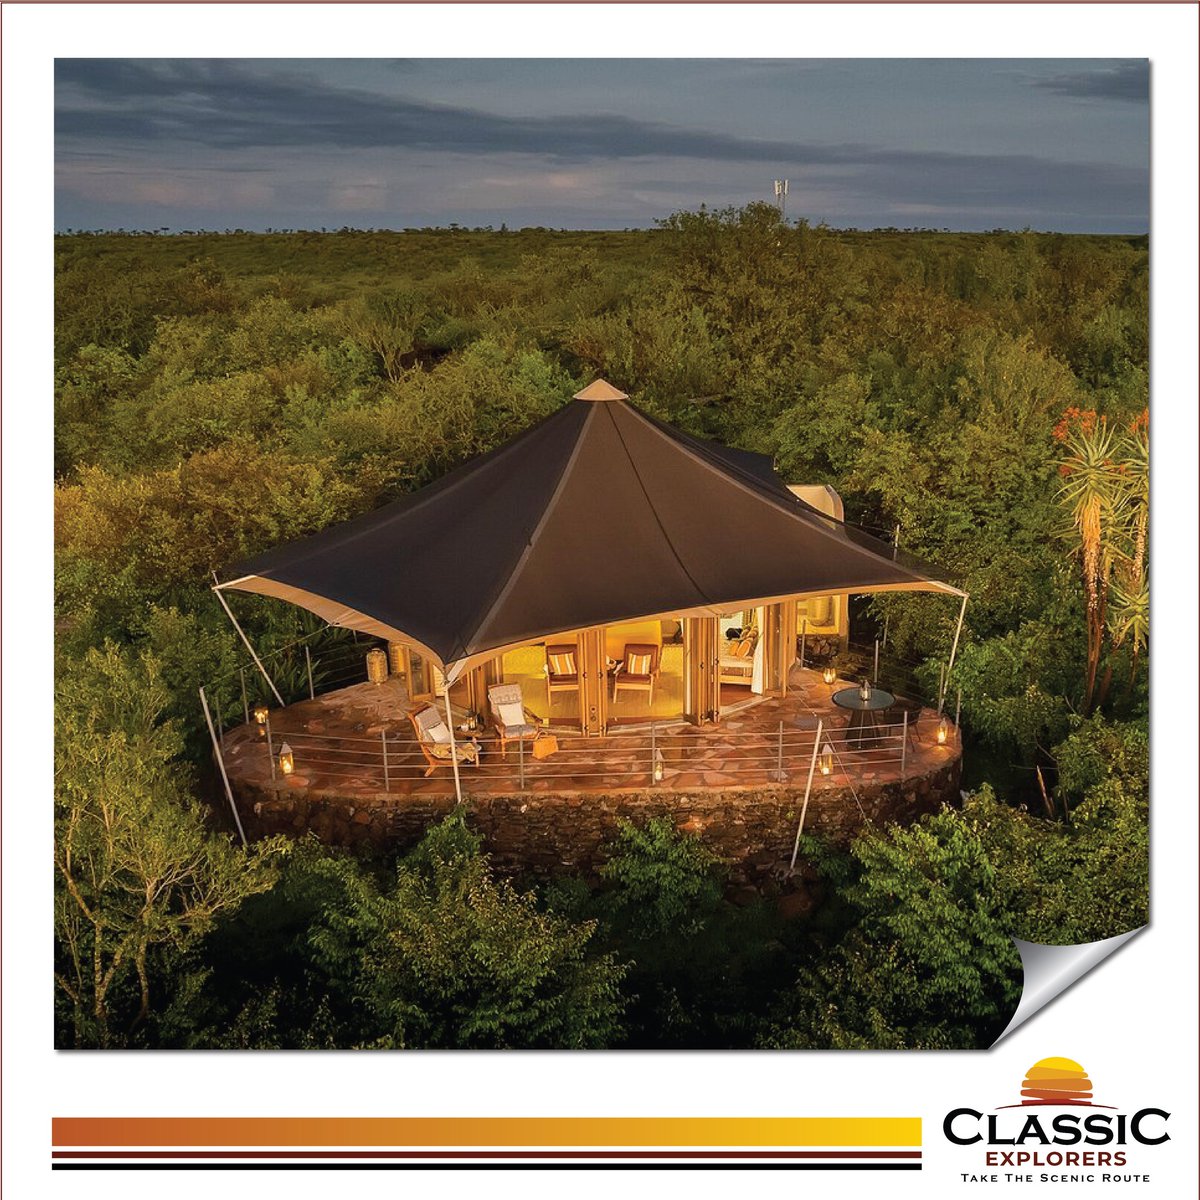 Where lions roar and sunsets ignite, find your wild with Classic Explorers. 
Craft your dream safari, guided by experts, and turn moments into treasured memories. 
#BeyondExpectations #ChooseClassic #ChooseClassic #SafariExperts  #StateHouse